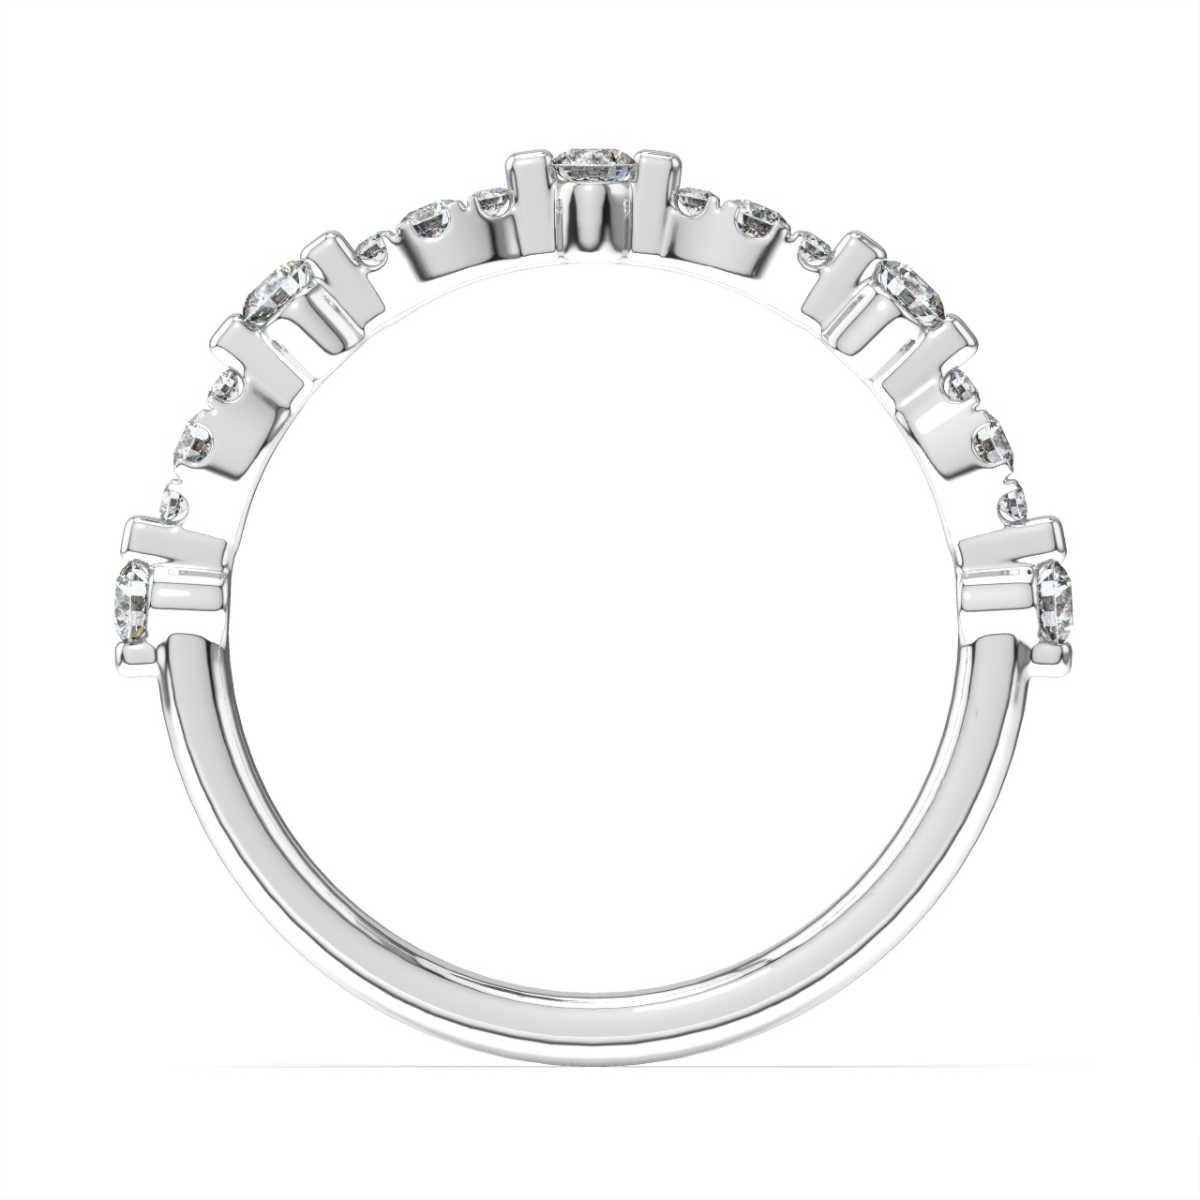 This ring features round brilliant diamonds prong-set along the top half of the band in alternating round and marquise-shaped settings. Experience the difference!

Product details: 

Center Gemstone Color: WHITE
Side Gemstone Type: NATURAL